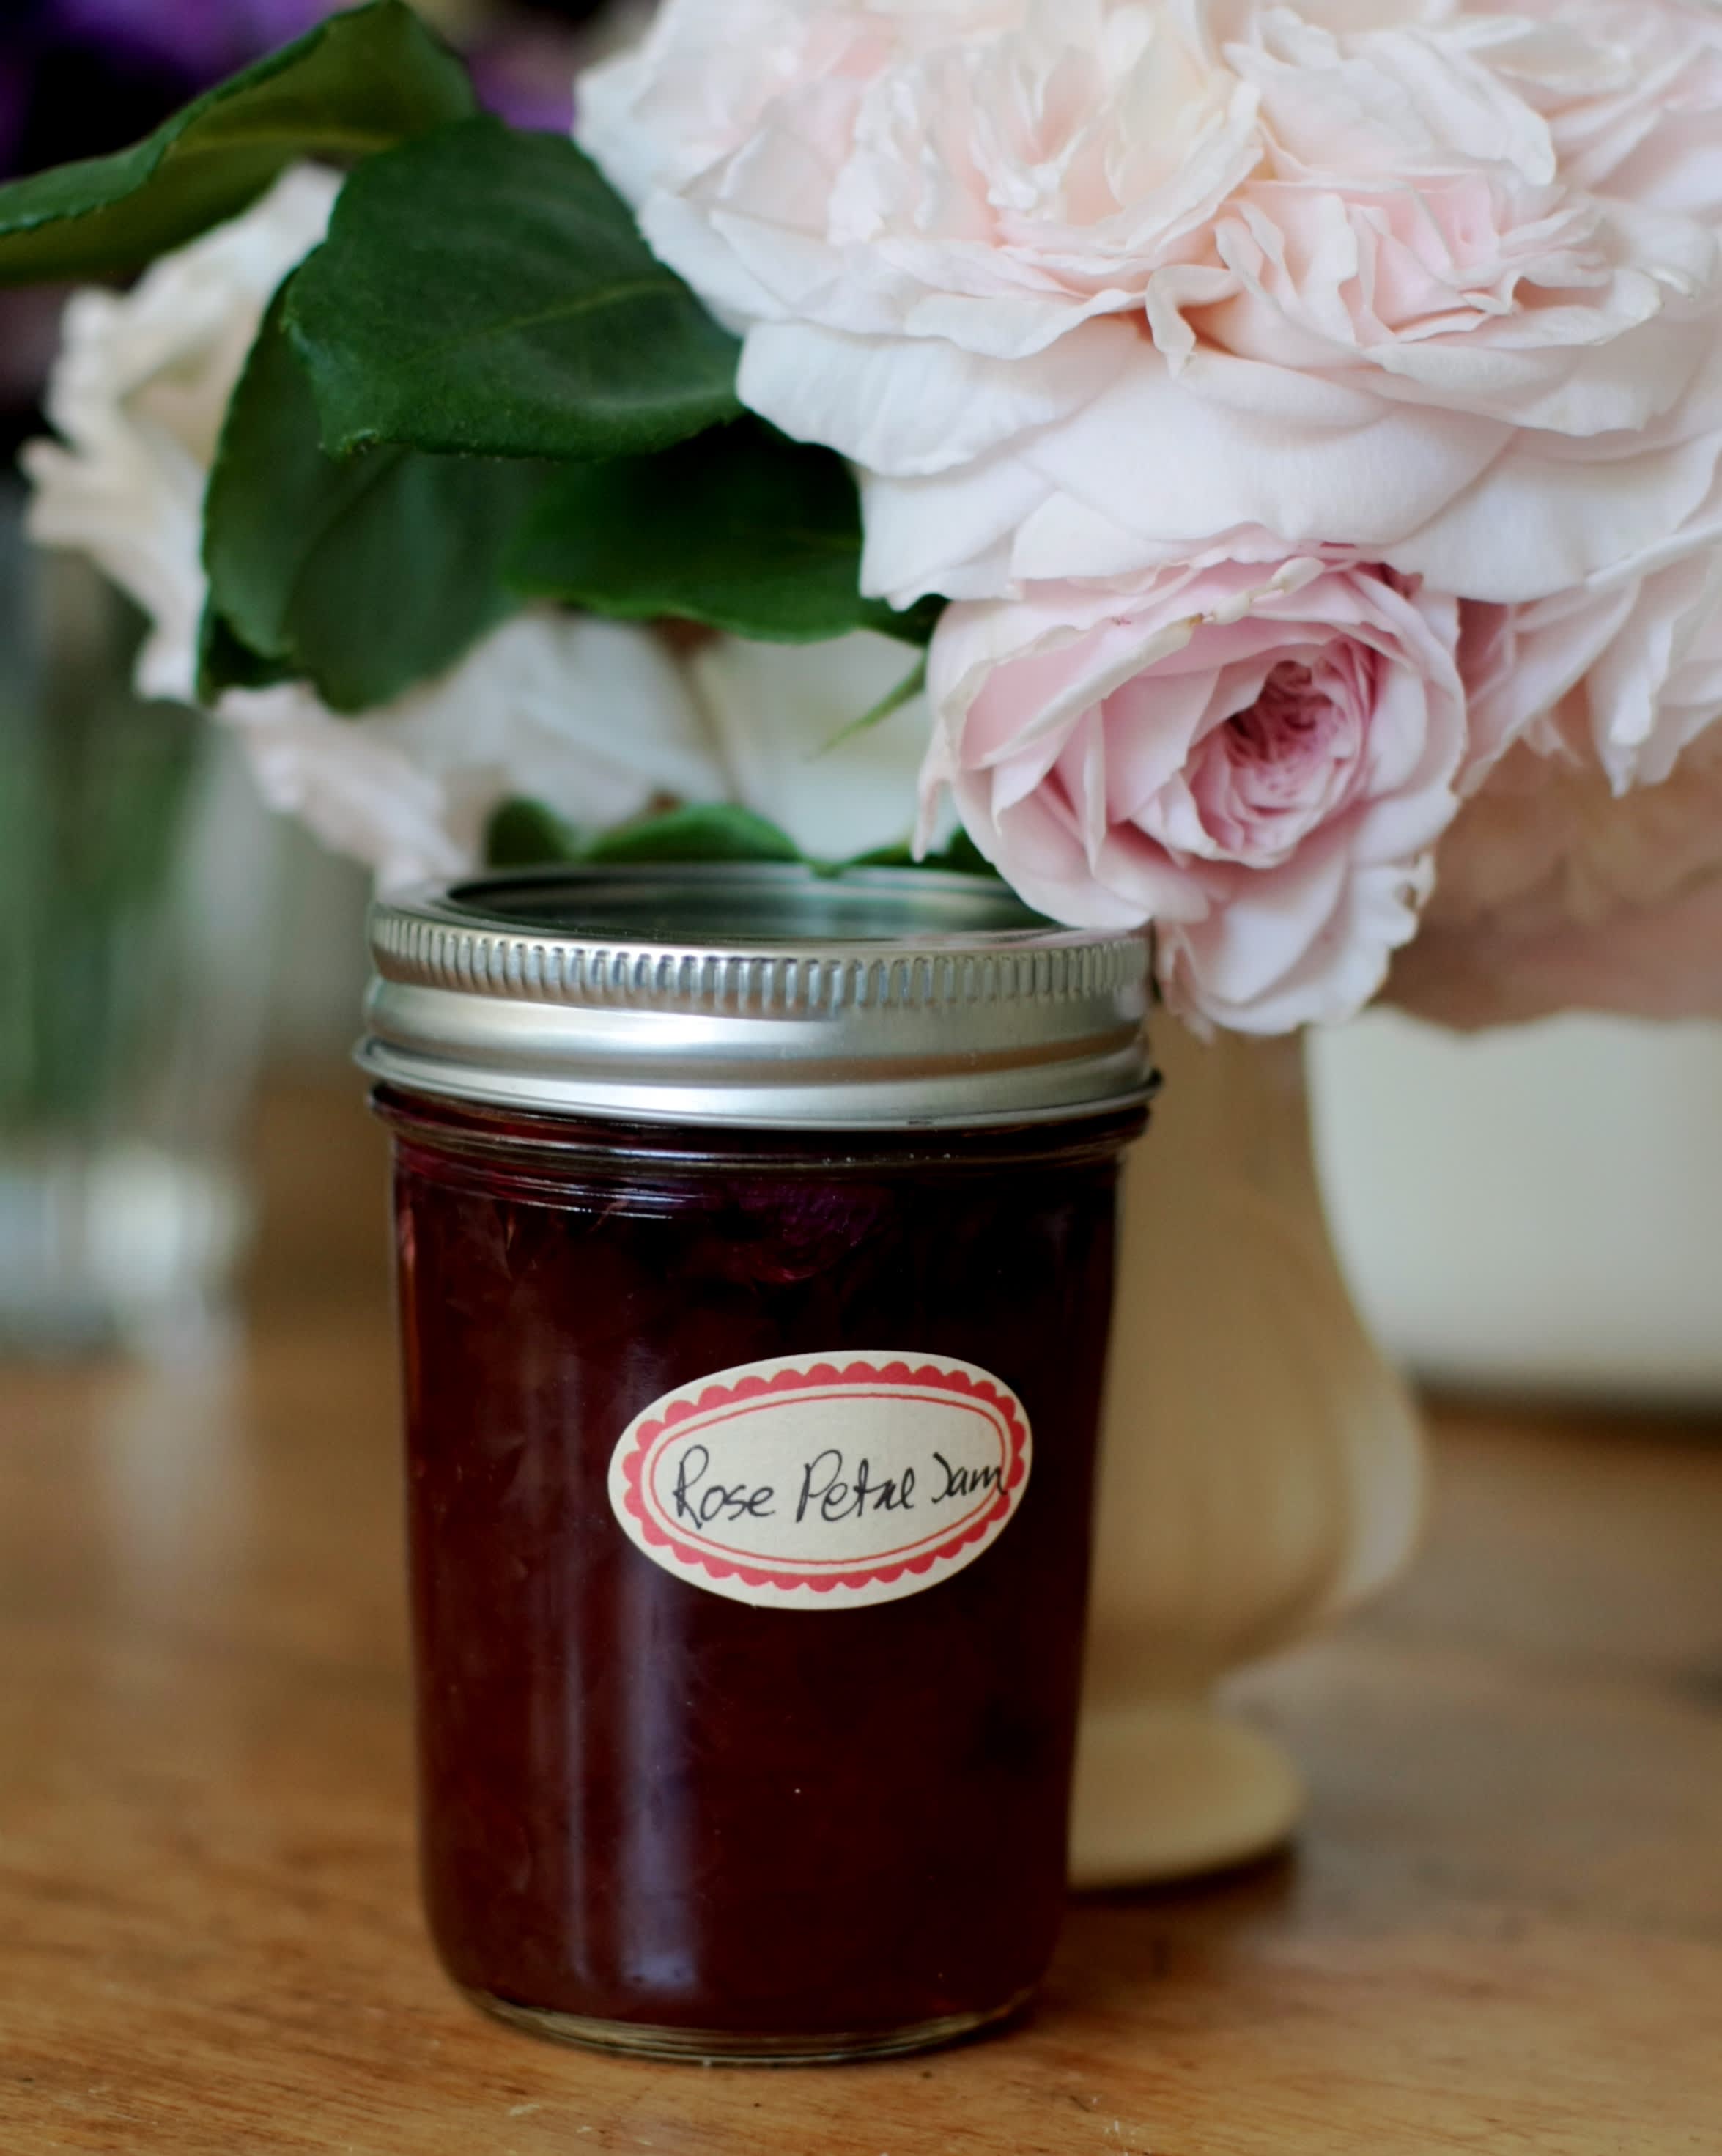 12 Ways To Use Rose Petals in the Kitchen